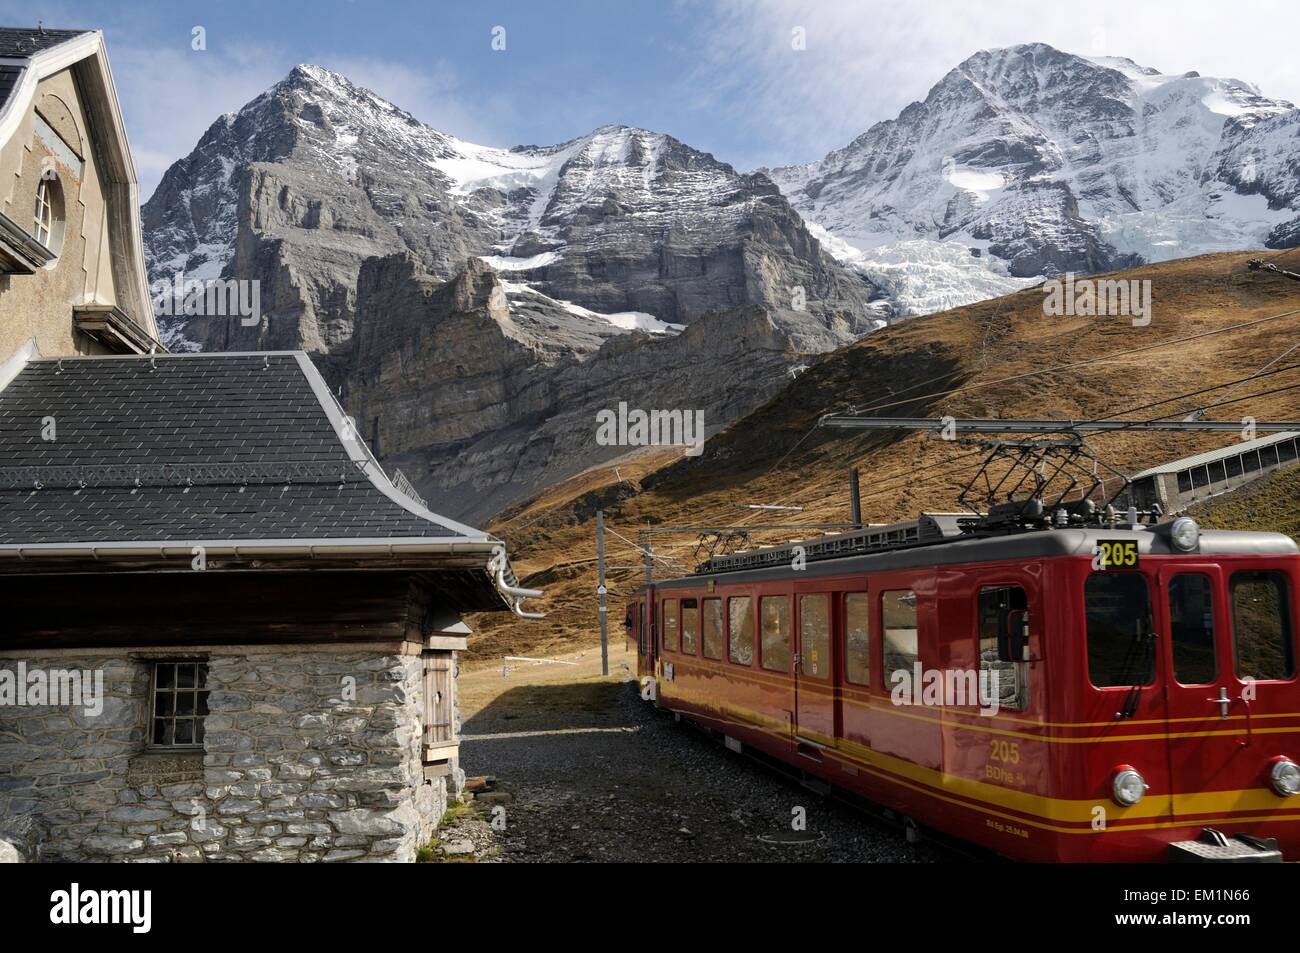 Jungfraujoch Railway Train Passing Eiger Information Station with Eiger and Monch in Background Stock Photo